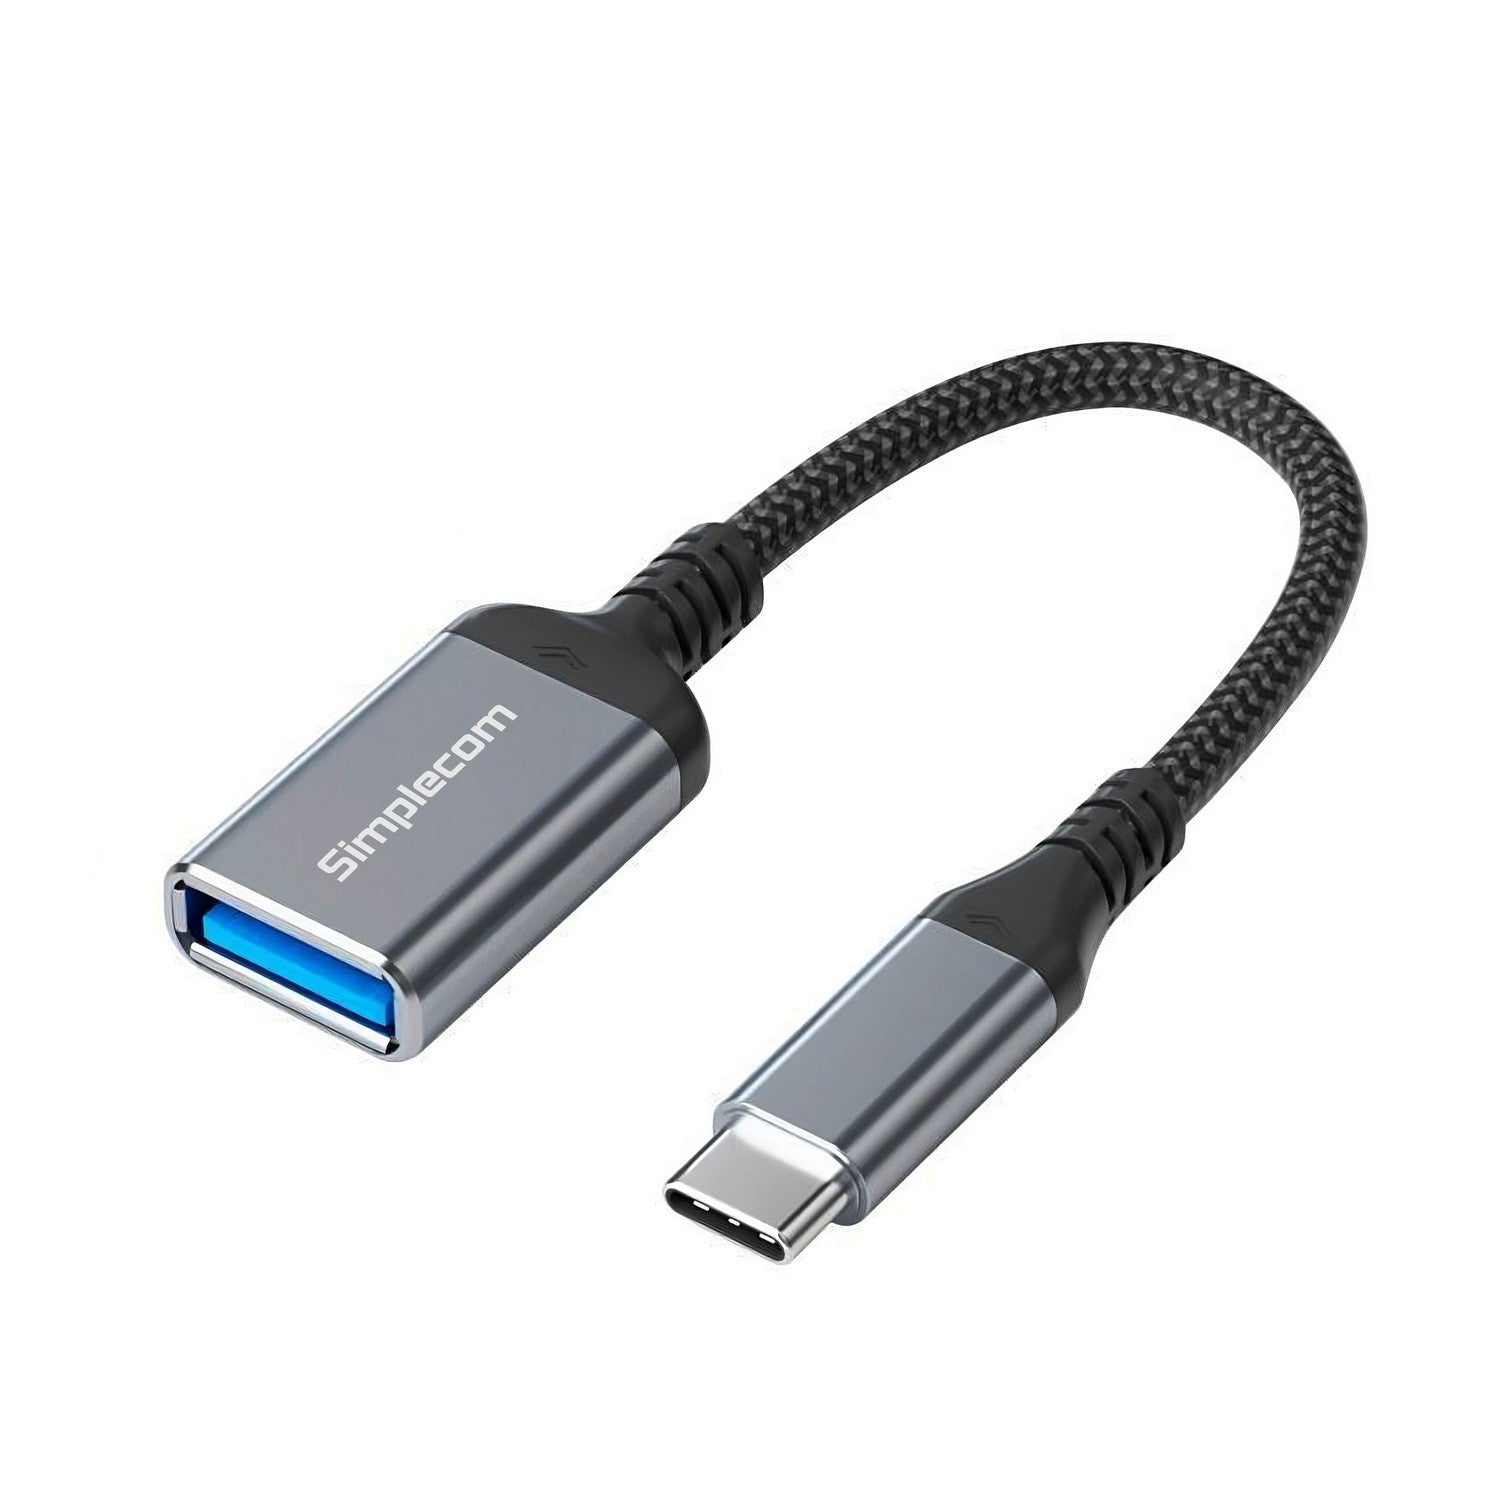 Simplecom USB-C to USB 3.0 Female OTG Adapter Cable